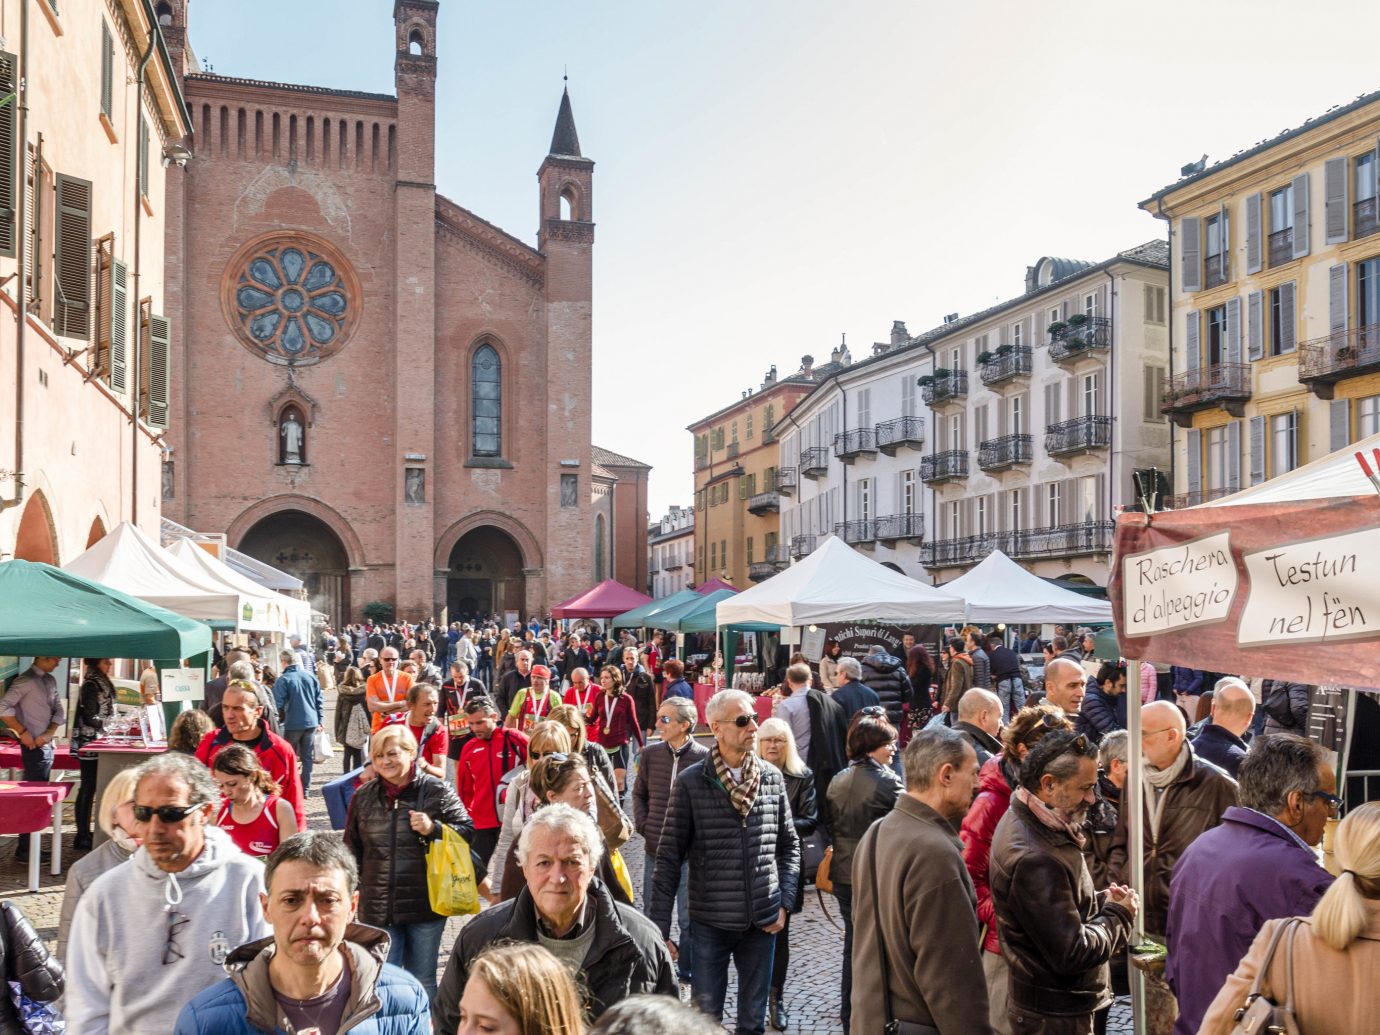 Food + Drink Hotels Italy Luxury Travel Trip Ideas building person outdoor people marketplace market City public space street Town crowd bazaar stall tourism group flea market fair fête town square Downtown pedestrian